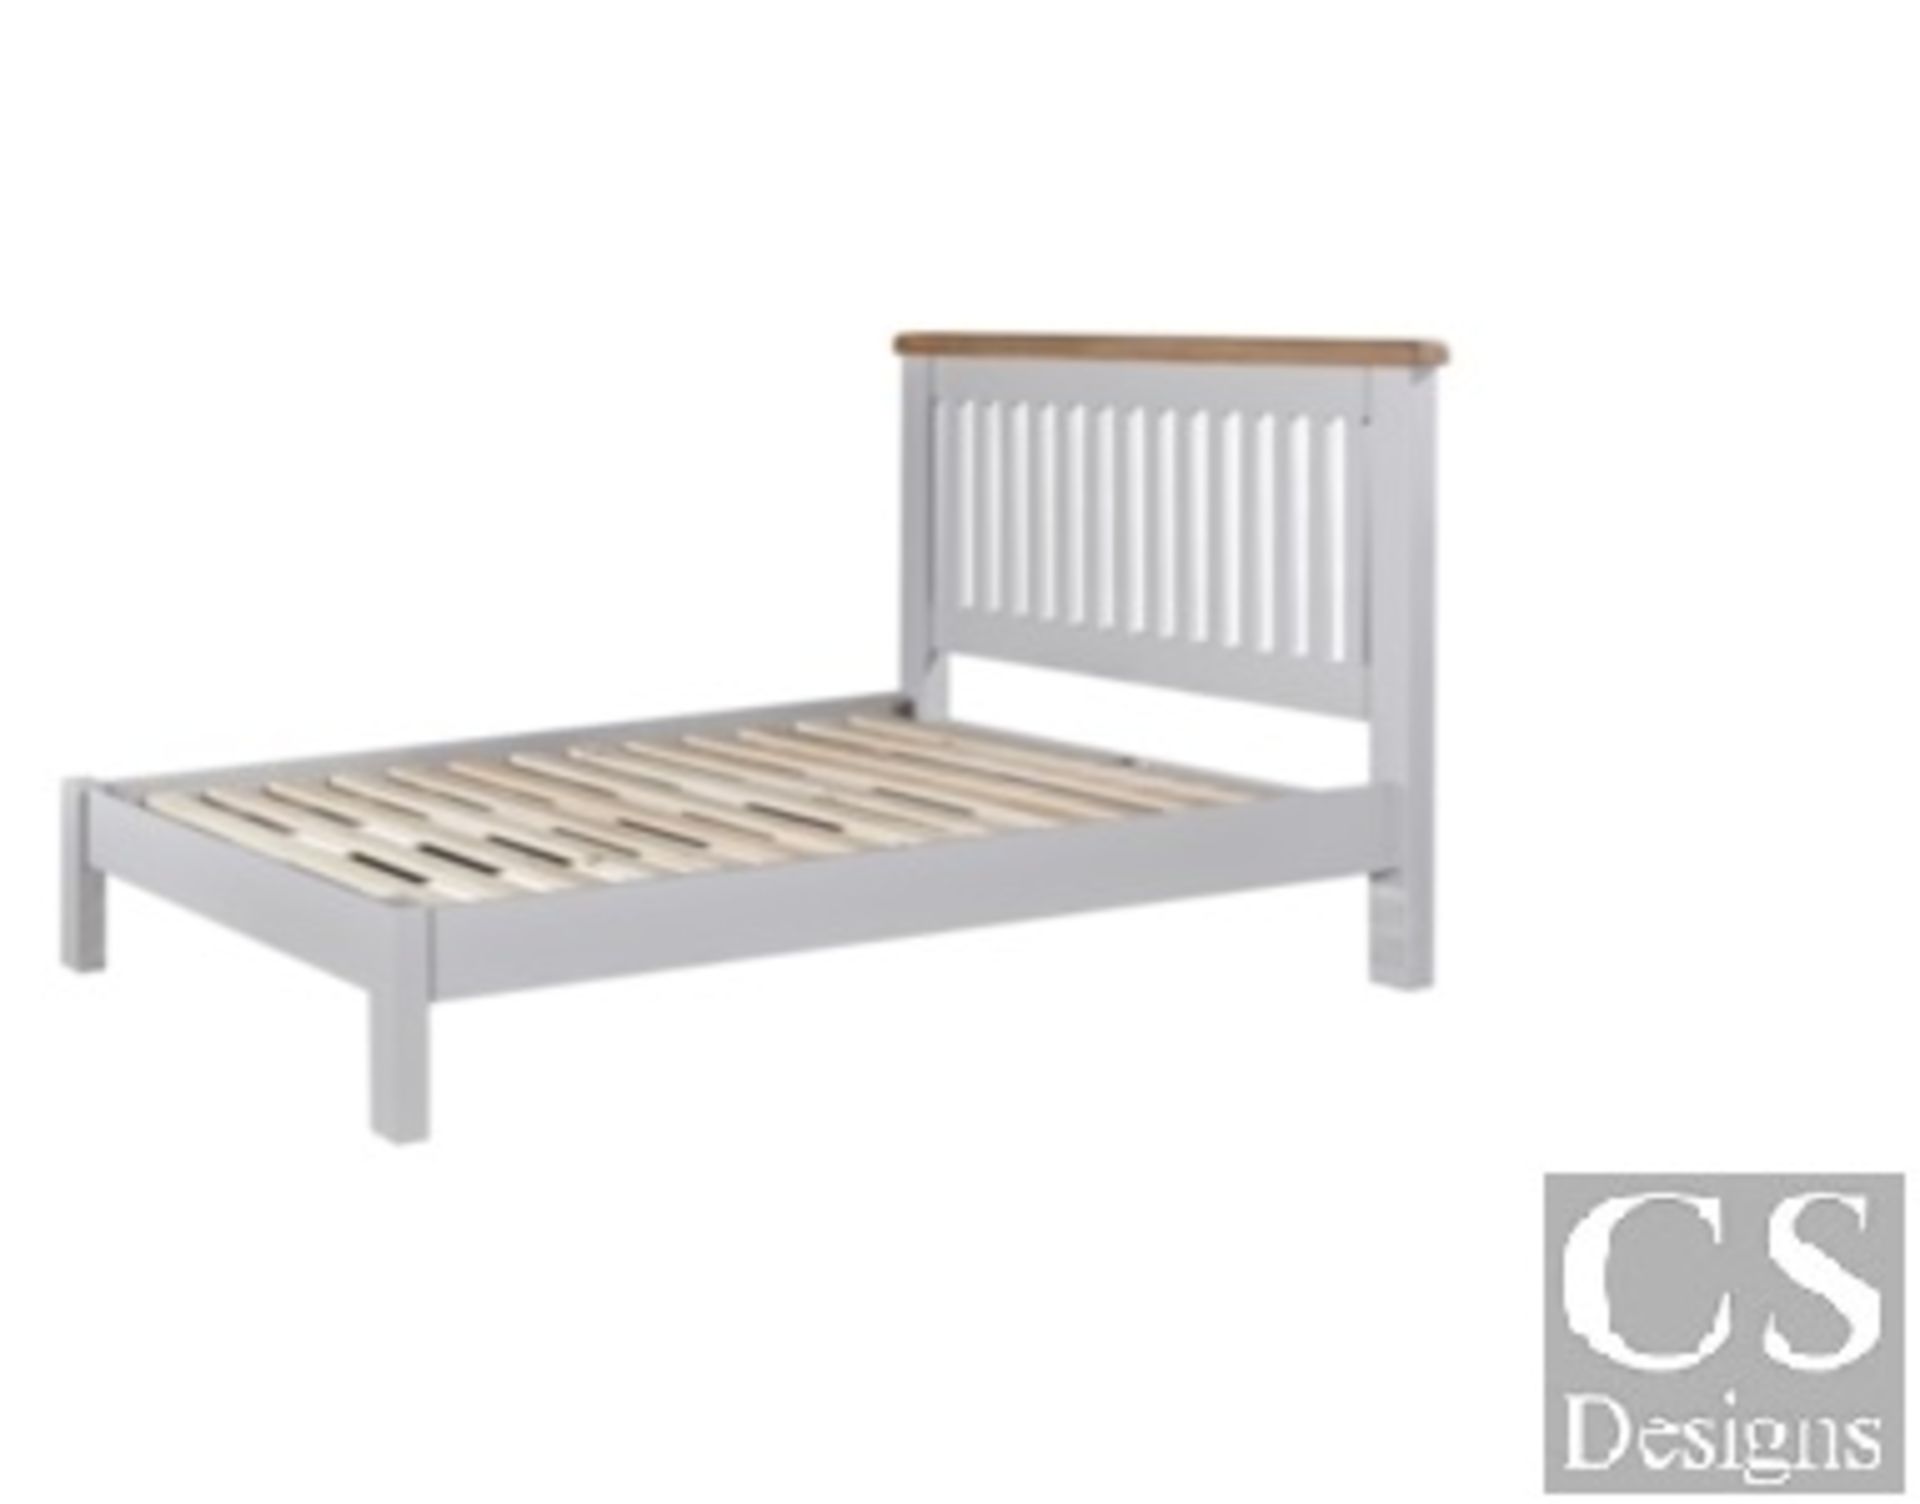 + VAT Brand New CS Designs "Daylesford" King Size Bed Frame With Natural Oak Tops And Solid - Image 3 of 3